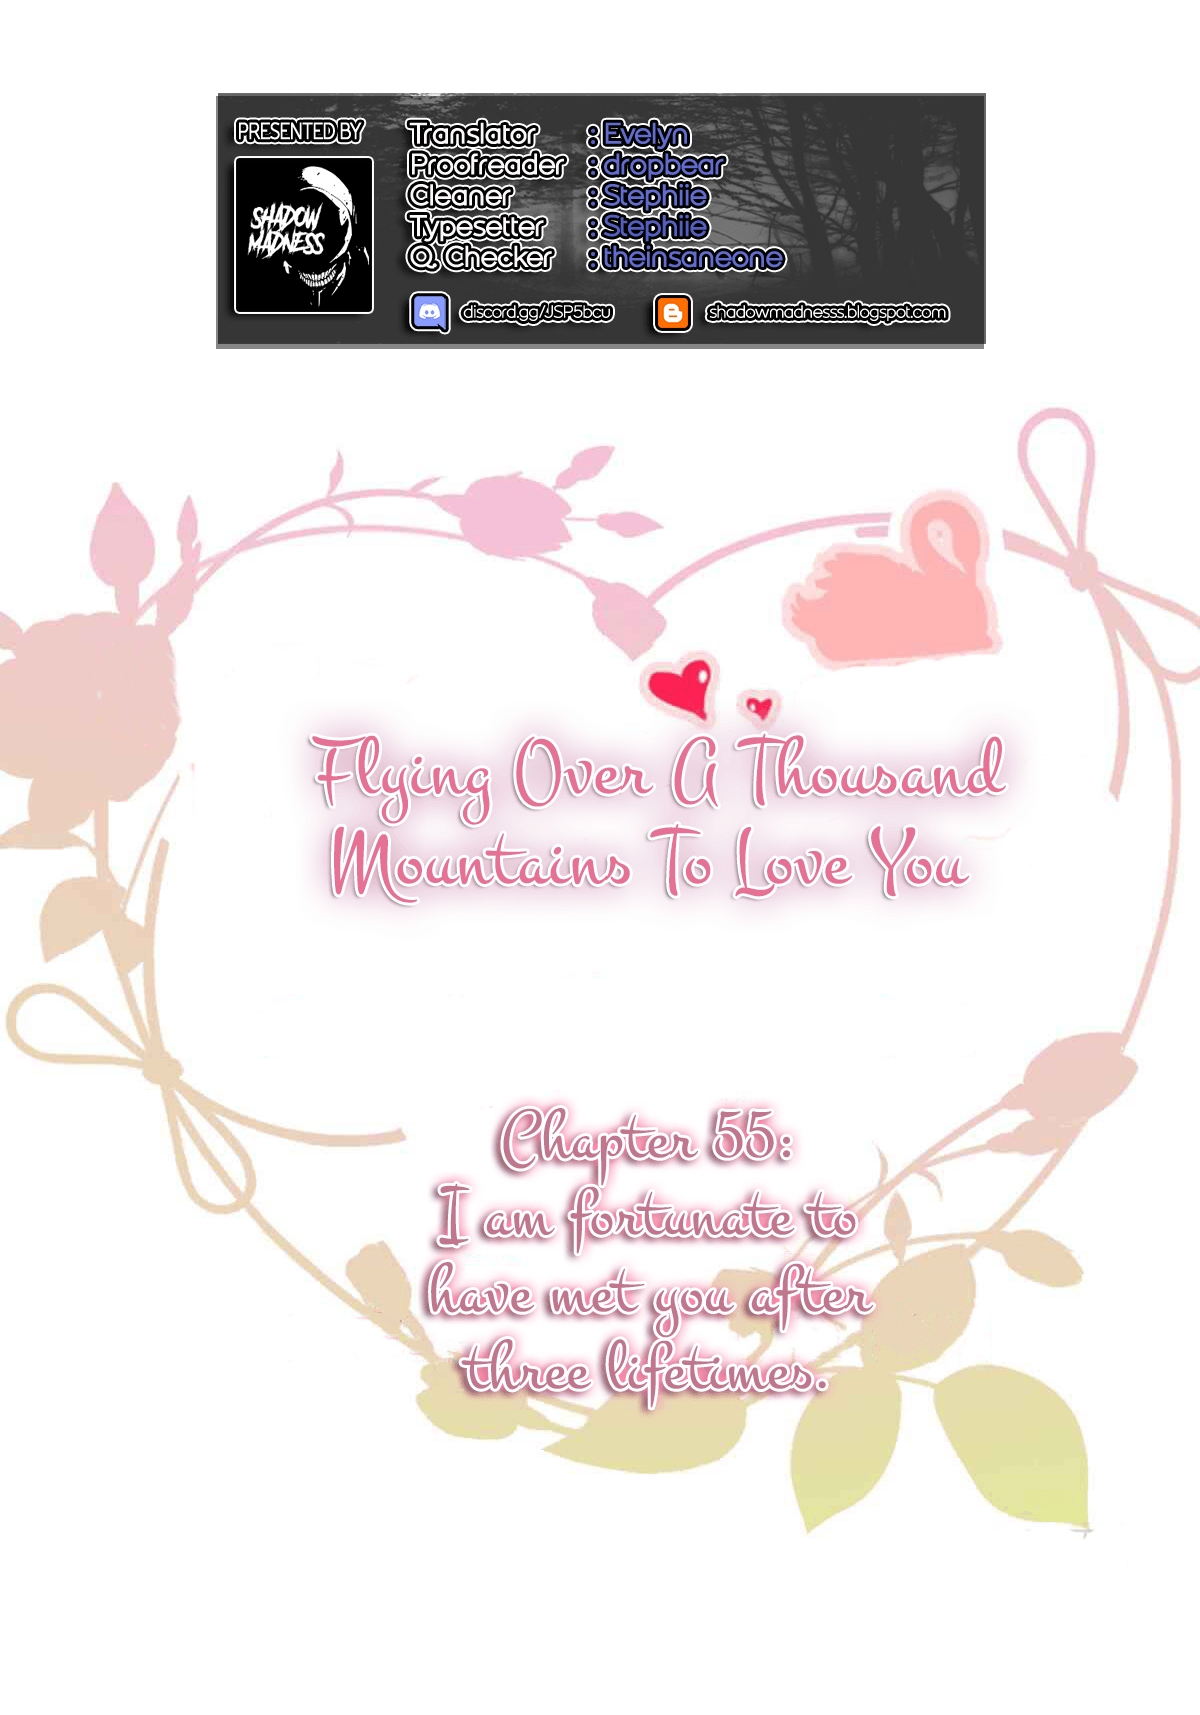 Flying Over a Thousand Mountains to Love You Ch. 55 I'm fortunate to have met you after three lifetimes